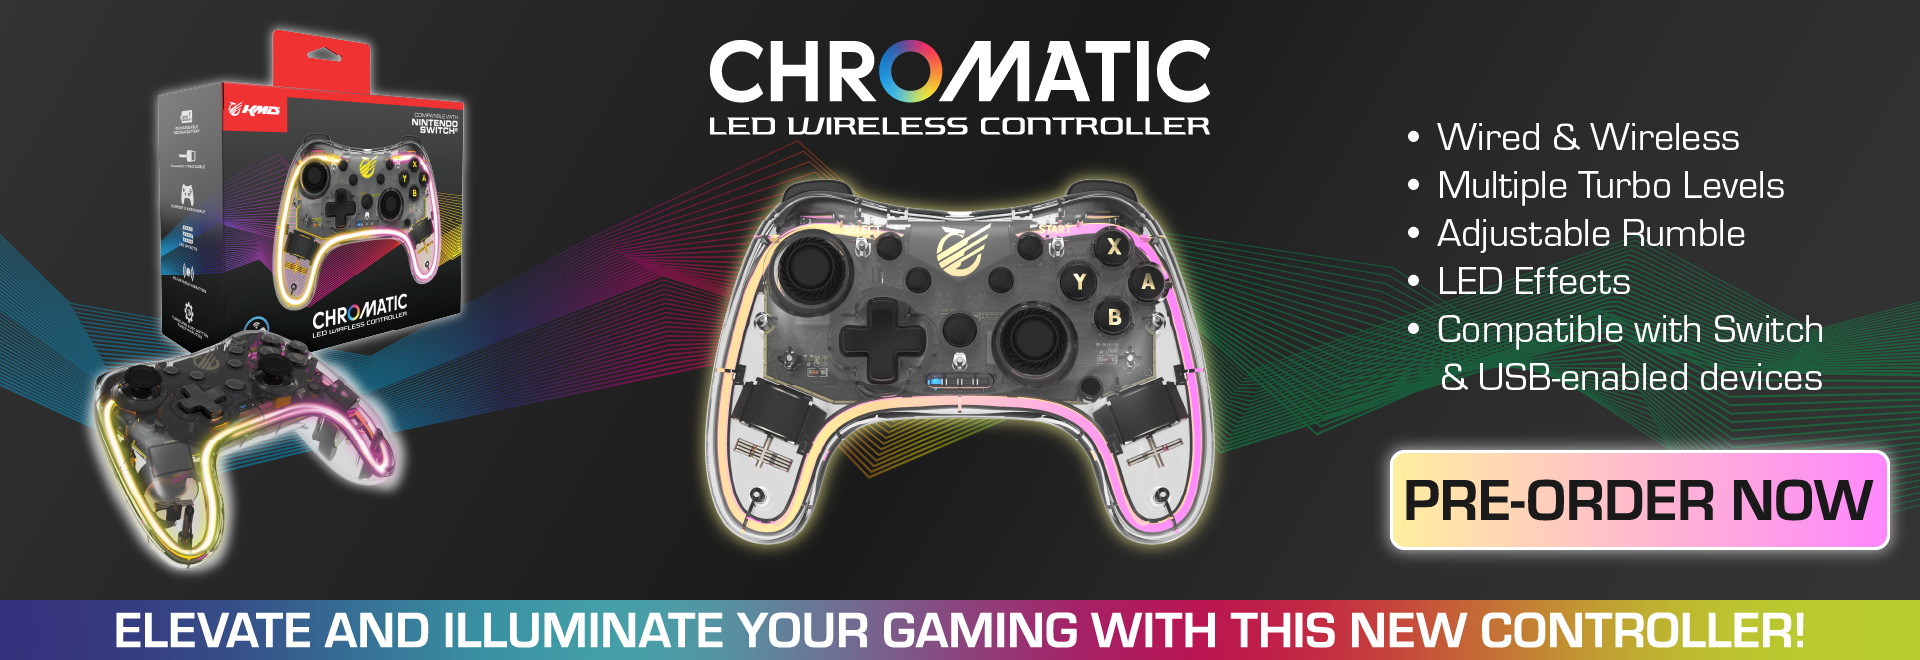 KMD Chromatic LED Wireless Controller - Pre-orders!